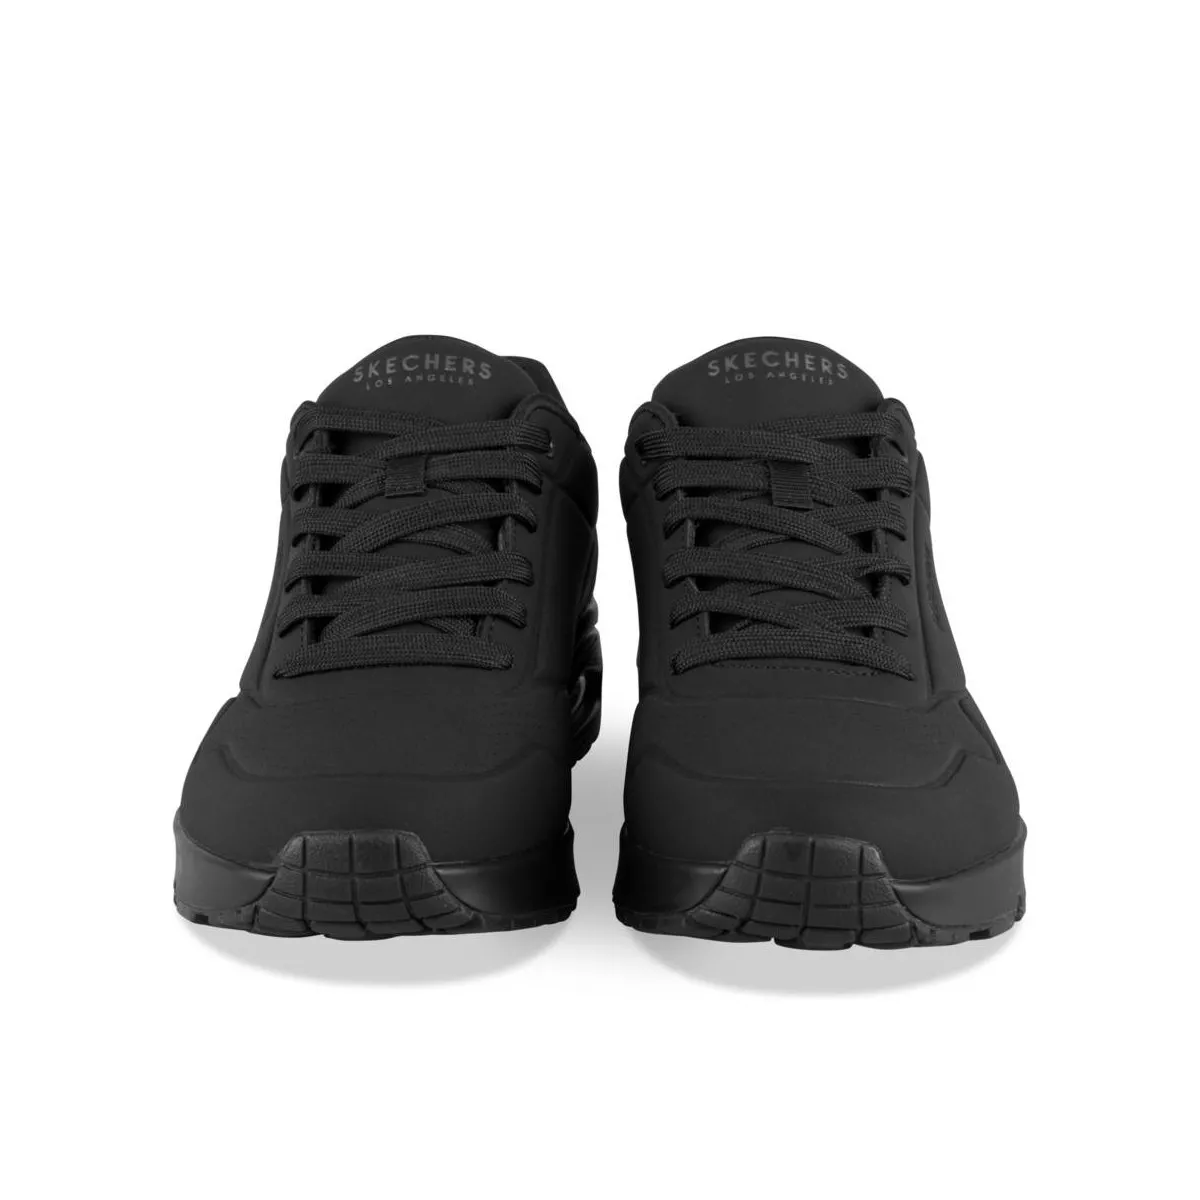 Men's Uno Stand On Air Sneaker - Black